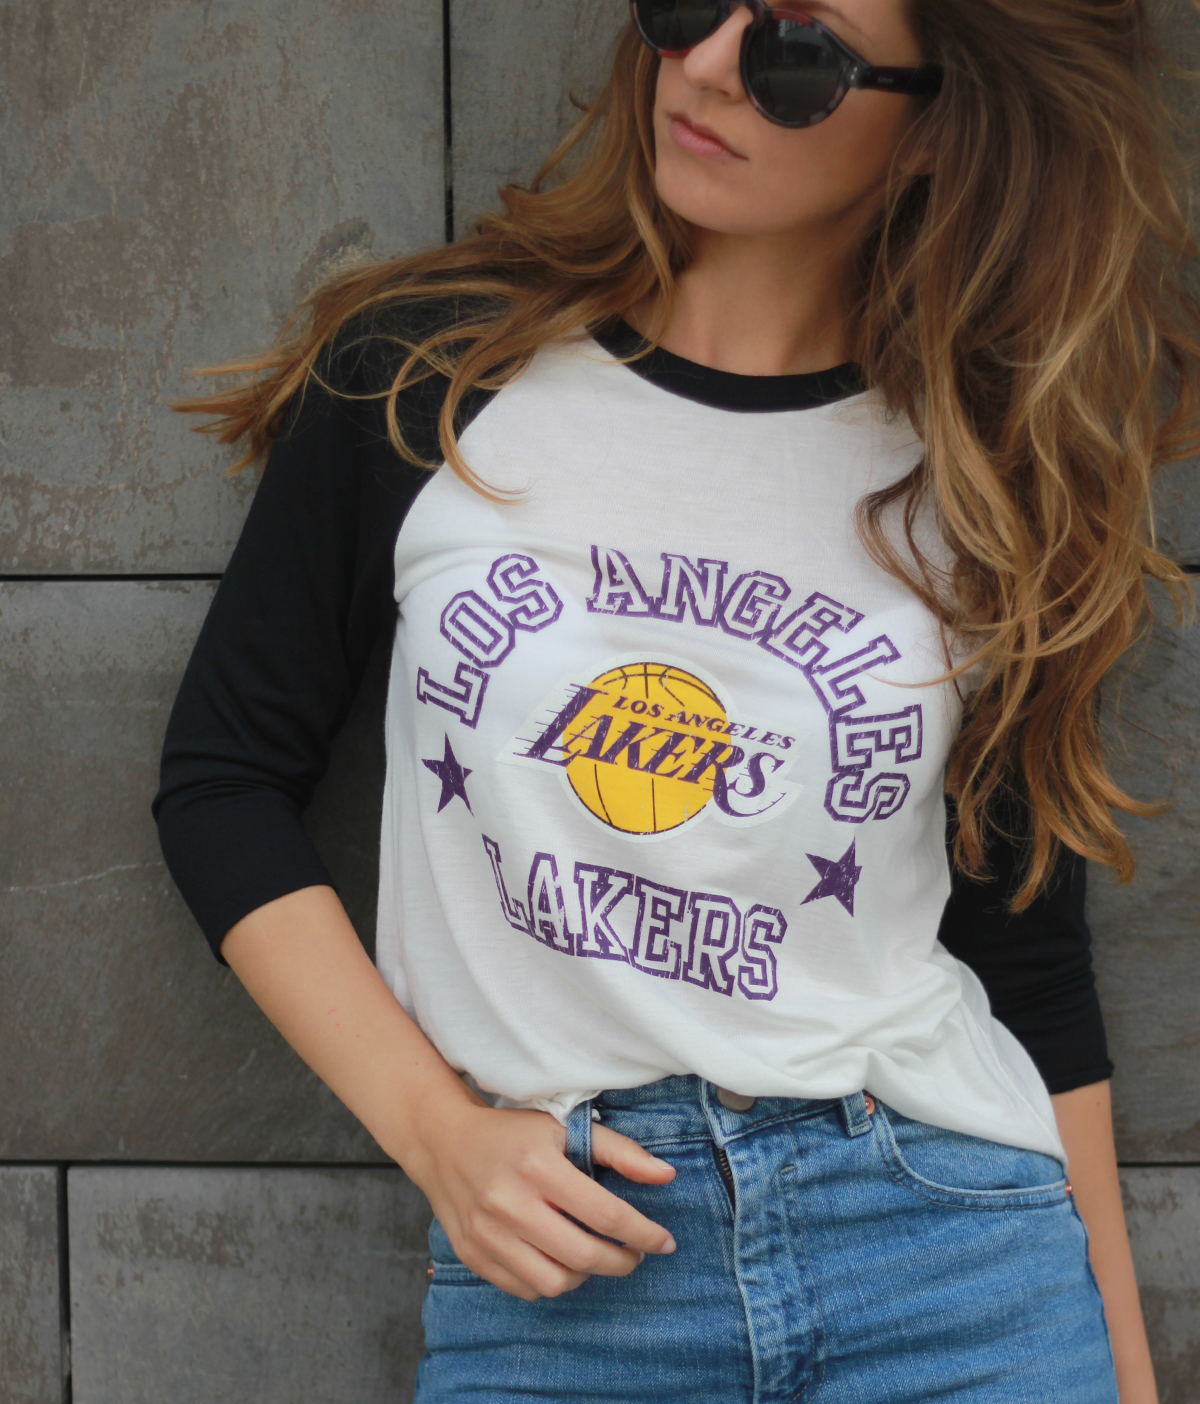 los angeles-lakers shirt-outfit-fashionblogger